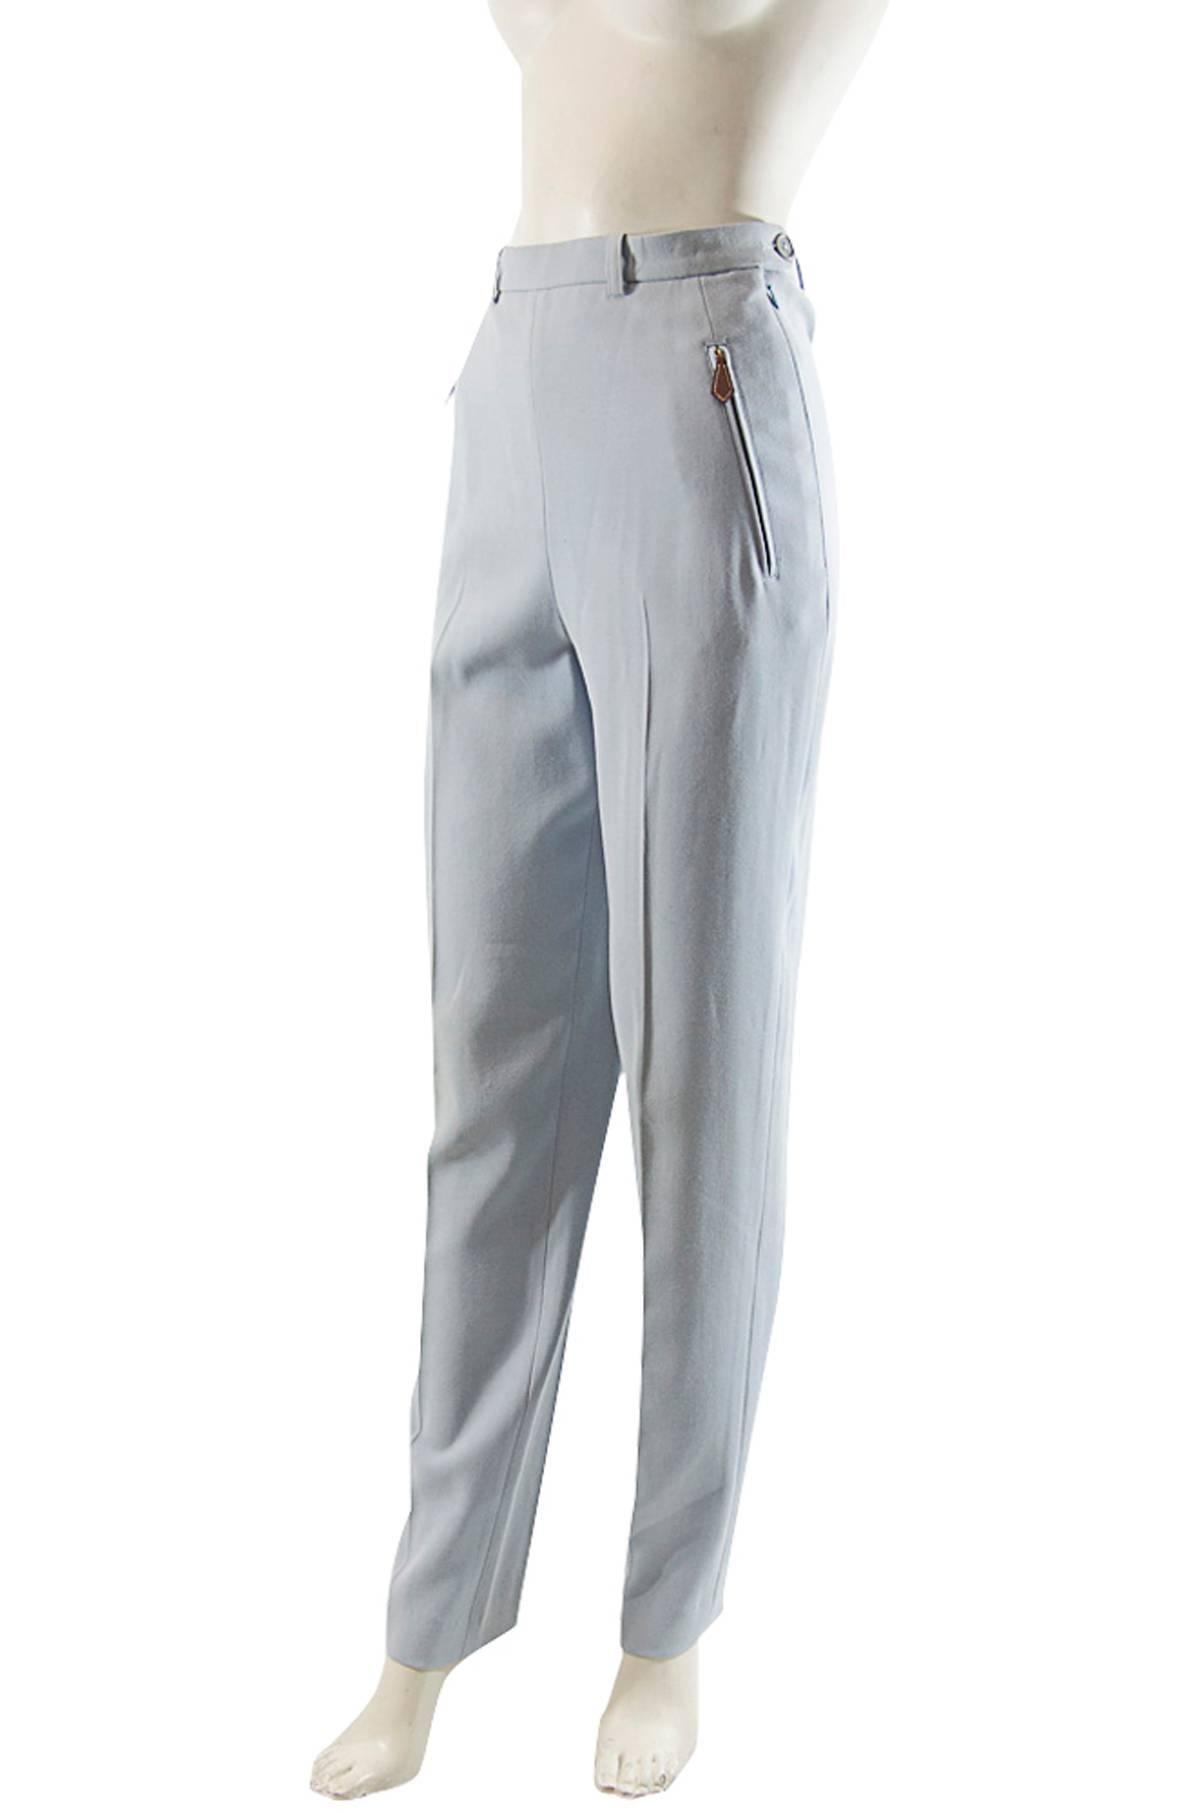 Hermes light blue riding pants zipper pockets with leather tabs size 38 waist 26 hips 36. Mint condition.